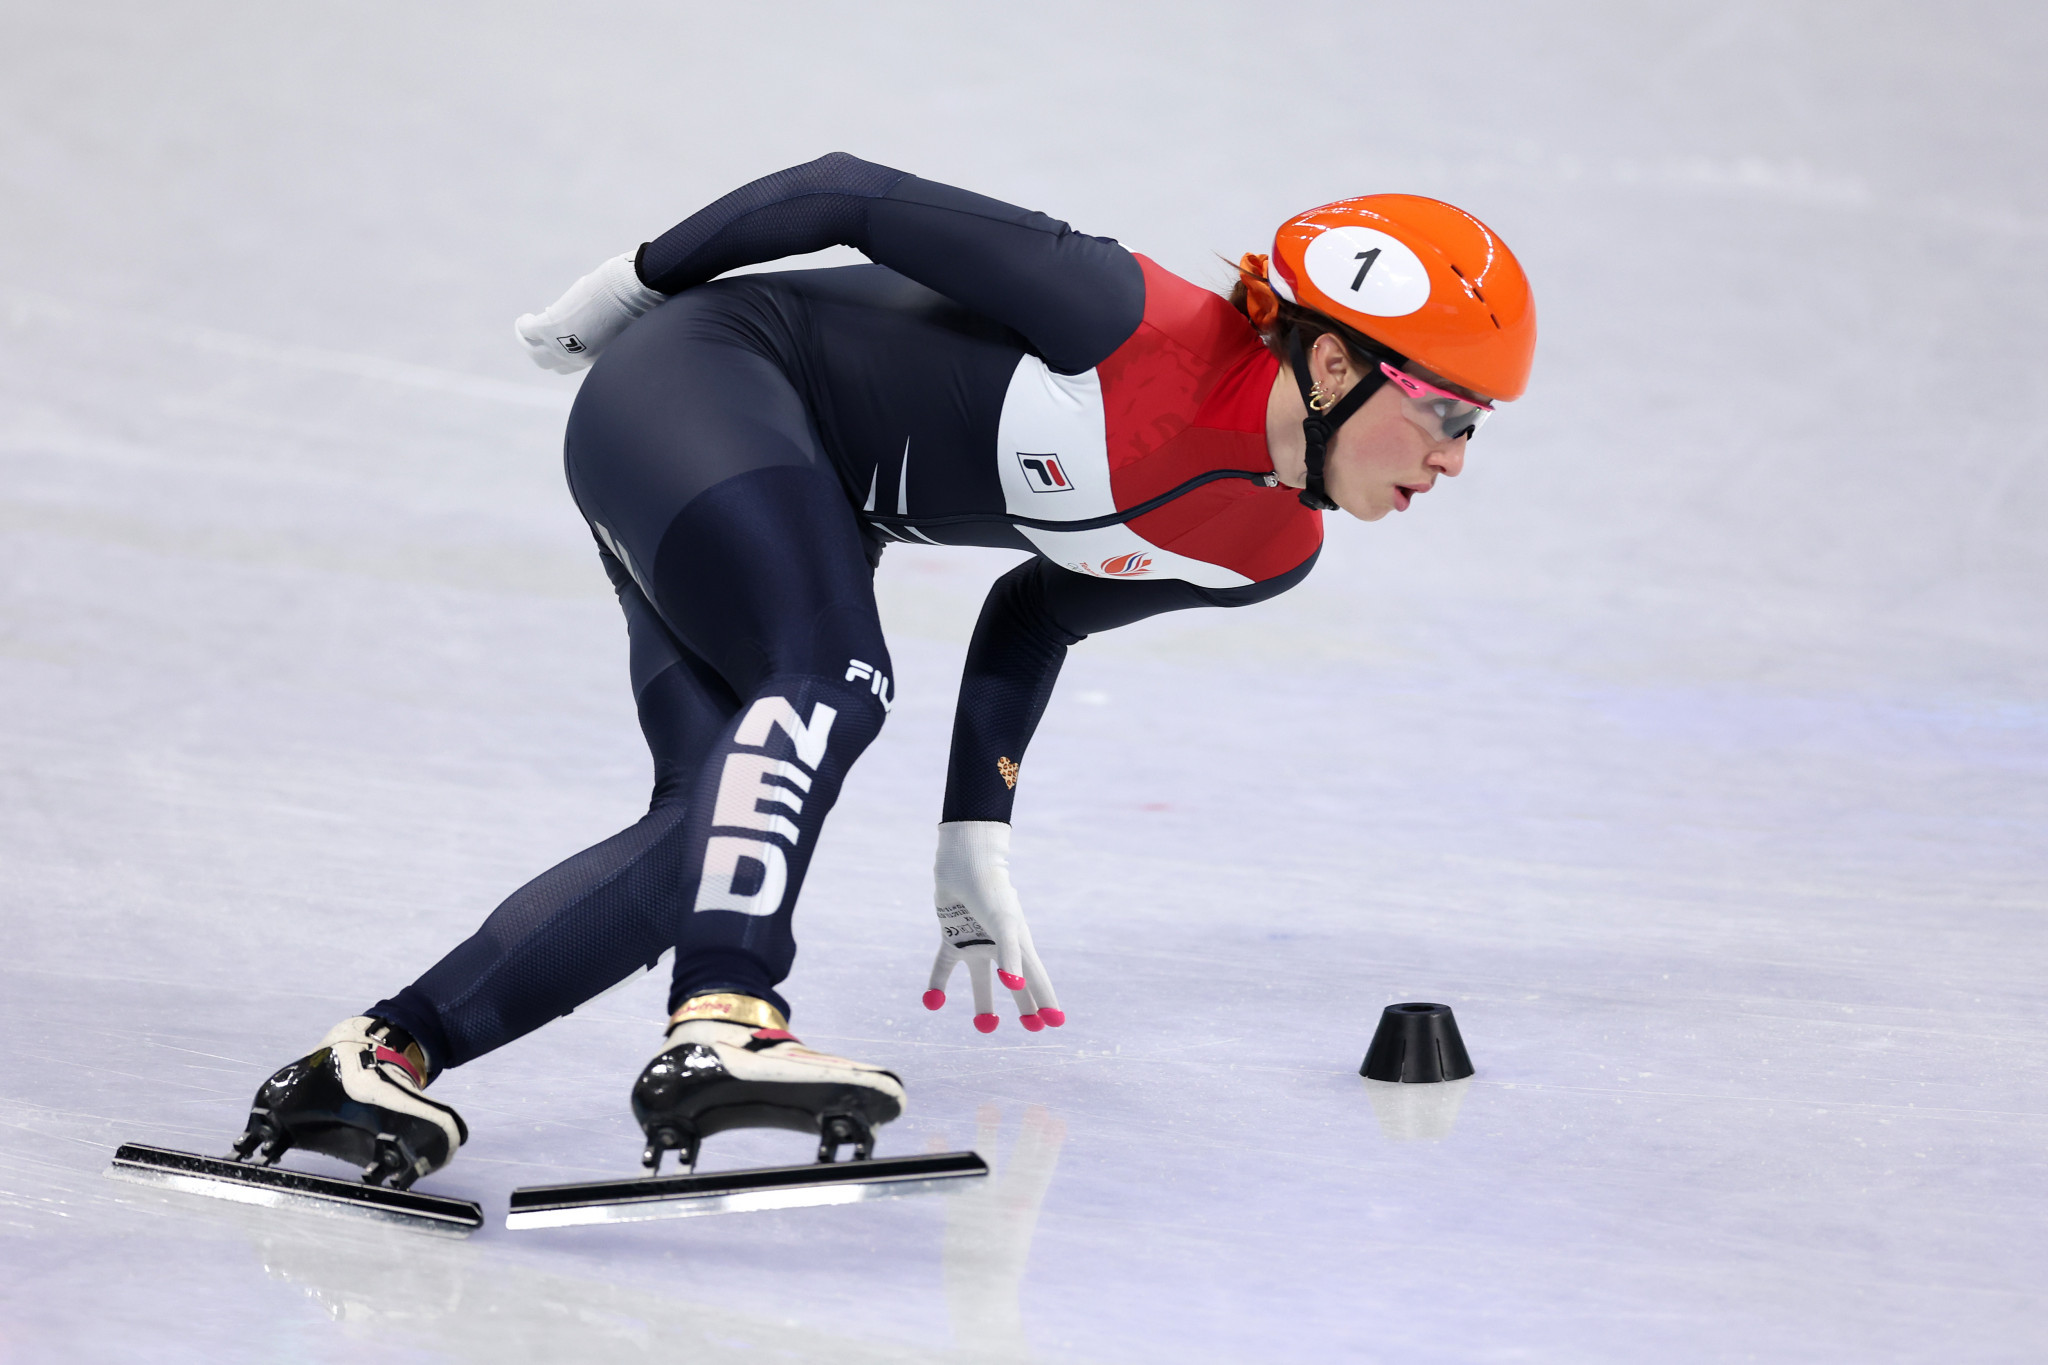 The Netherlands' Suzanne Schulting won the women's 1,000m race to move closer to the Short Track Crystal Globe ©Getty Images